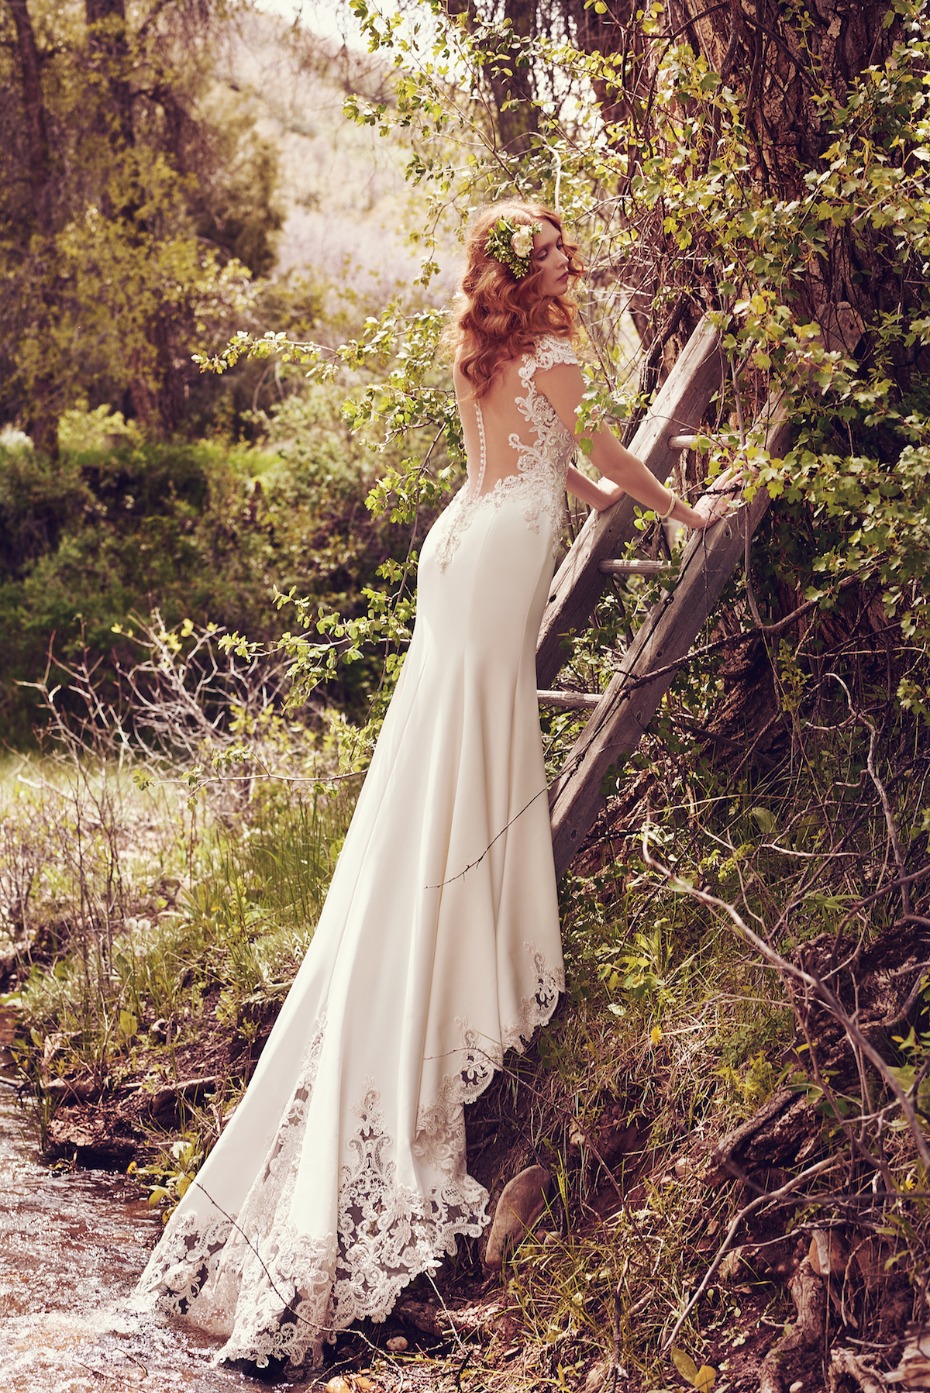 Terry Costa Hosting Maggie Sottero Trunk Show Jan 12-Jan 14